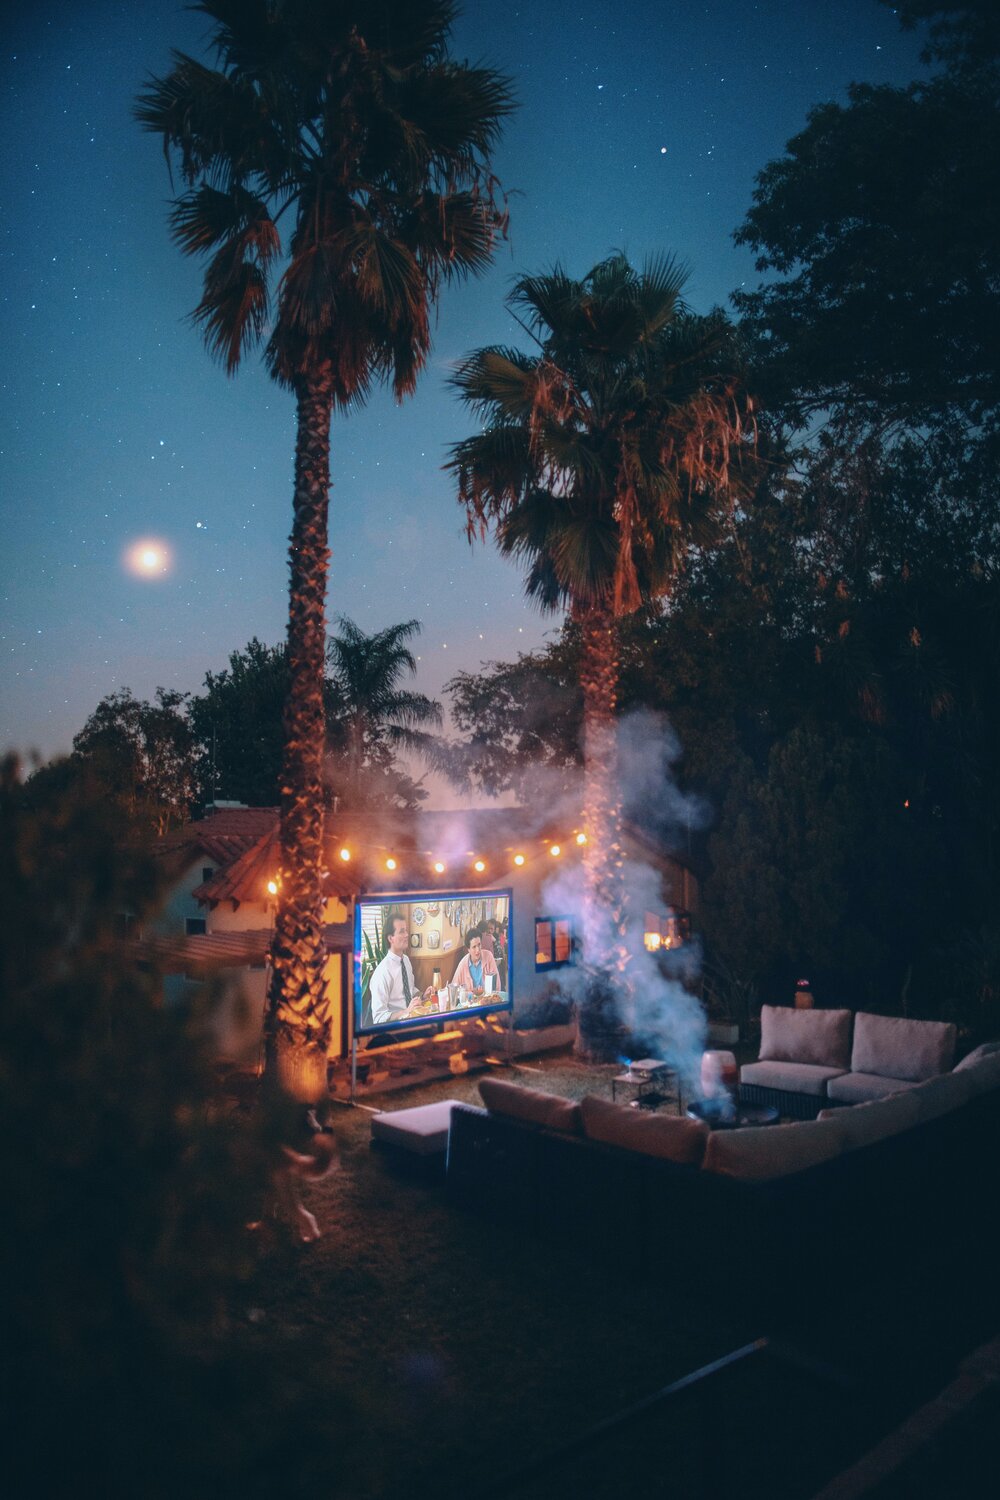 Image: https://www.pexels.com/photo/palm-trees-near-projection-screen-during-nighttime-3131971/